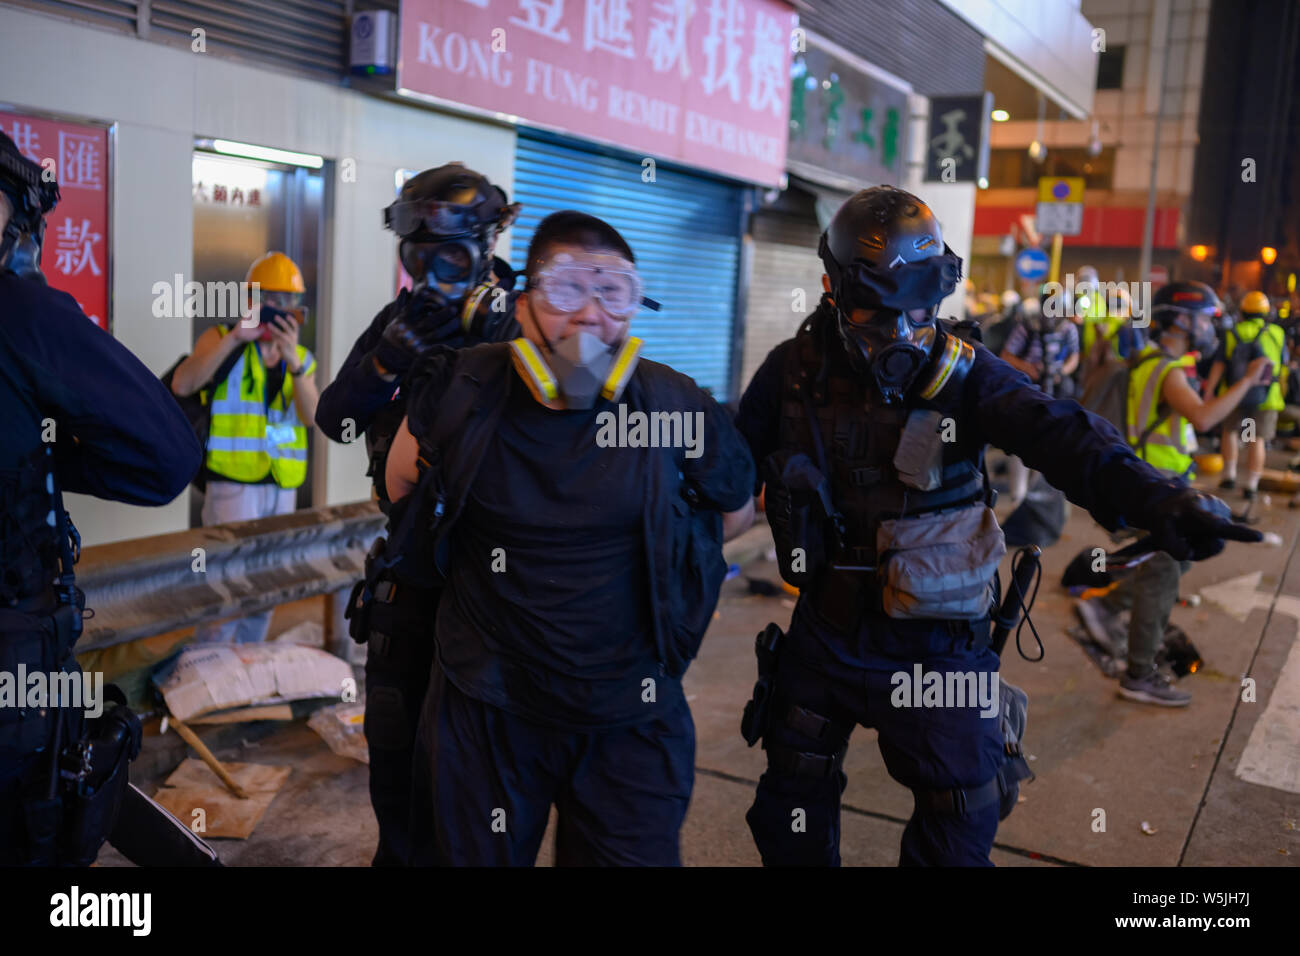 Hong Kong- 28 July 2019: Hong Kong public protest anti-extradition law in Hong Kong Island, which turn into Police conflict at night. Stock Photo